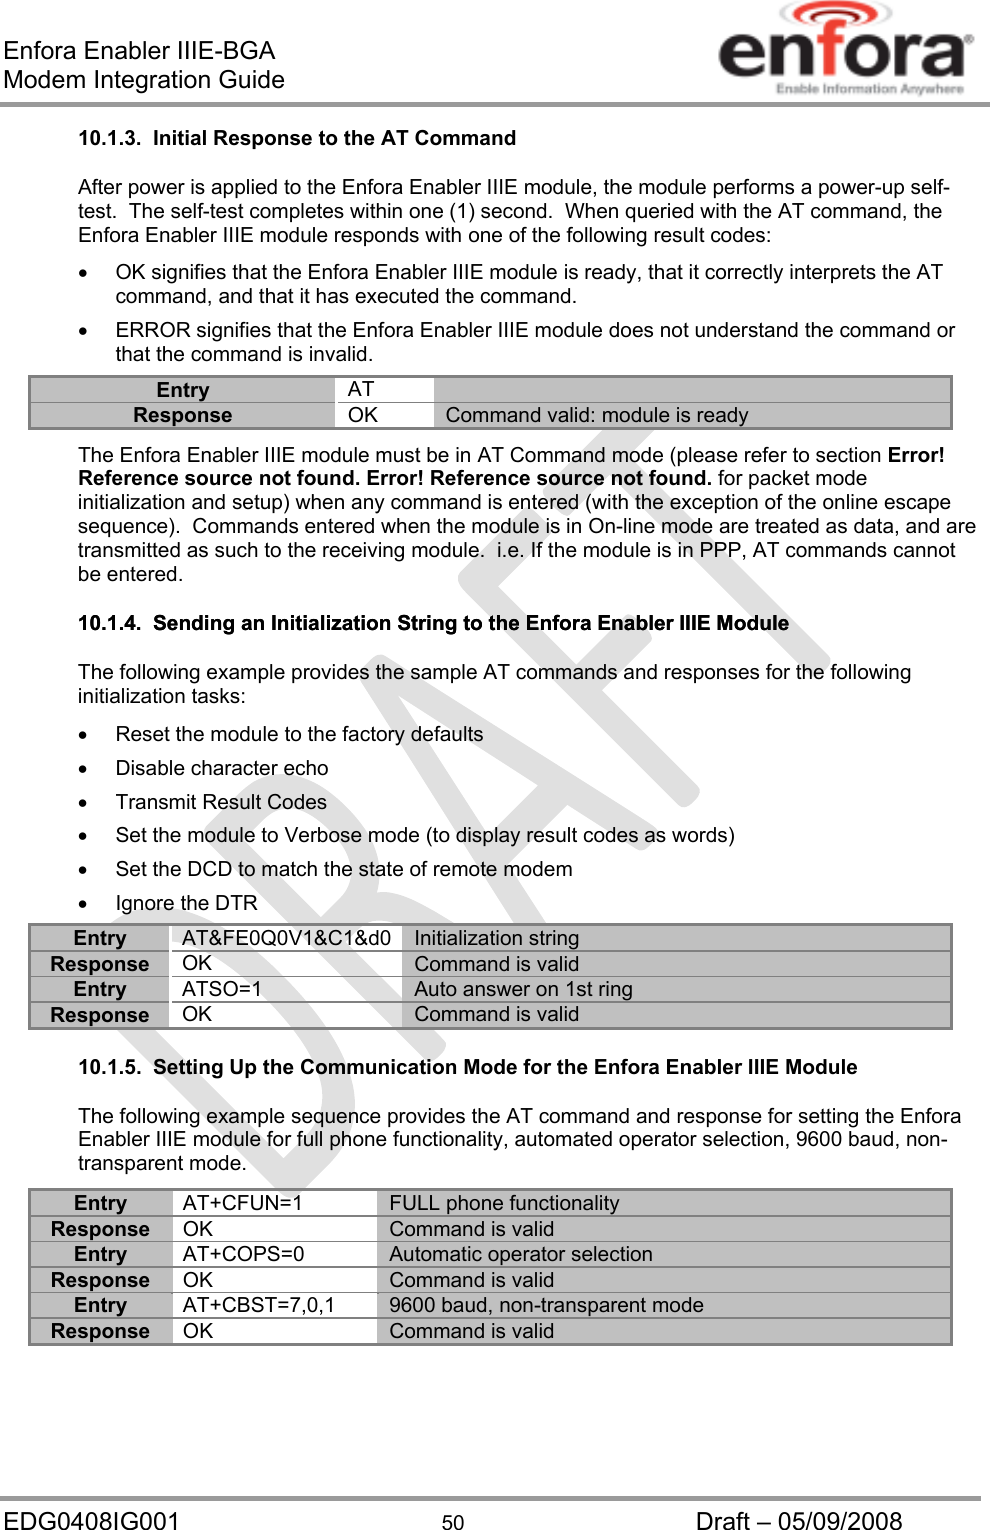 Enfora Enabler IIIE-BGA Modem Integration Guide EDG0408IG001  50  Draft – 05/09/2008 10.1.3.  Initial Response to the AT Command After power is applied to the Enfora Enabler IIIE module, the module performs a power-up self-test.  The self-test completes within one (1) second.  When queried with the AT command, the Enfora Enabler IIIE module responds with one of the following result codes:   OK signifies that the Enfora Enabler IIIE module is ready, that it correctly interprets the AT command, and that it has executed the command.   ERROR signifies that the Enfora Enabler IIIE module does not understand the command or that the command is invalid. Entry  AT  Response  OK  Command valid: module is ready The Enfora Enabler IIIE module must be in AT Command mode (please refer to section Error! Reference source not found. Error! Reference source not found. for packet mode initialization and setup) when any command is entered (with the exception of the online escape sequence).  Commands entered when the module is in On-line mode are treated as data, and are transmitted as such to the receiving module.  i.e. If the module is in PPP, AT commands cannot be entered. 10.1.4.  Sending an Initialization String to the Enfora Enabler IIIE Module 10.1.4.  Sending an Initialization String to the Enfora Enabler IIIE Module The following example provides the sample AT commands and responses for the following initialization tasks:   Reset the module to the factory defaults  Disable character echo   Transmit Result Codes   Set the module to Verbose mode (to display result codes as words)   Set the DCD to match the state of remote modem  Ignore the DTR Entry AT&amp;FE0Q0V1&amp;C1&amp;d0 Initialization string Response  OK  Command is valid Entry  ATSO=1  Auto answer on 1st ring Response  OK  Command is valid 10.1.5.  Setting Up the Communication Mode for the Enfora Enabler IIIE Module The following example sequence provides the AT command and response for setting the Enfora Enabler IIIE module for full phone functionality, automated operator selection, 9600 baud, non-transparent mode. Entry AT+CFUN=1 FULL phone functionality Response  OK  Command is valid Entry AT+COPS=0 Automatic operator selection Response  OK  Command is valid Entry AT+CBST=7,0,1 9600 baud, non-transparent mode Response  OK Command is valid 